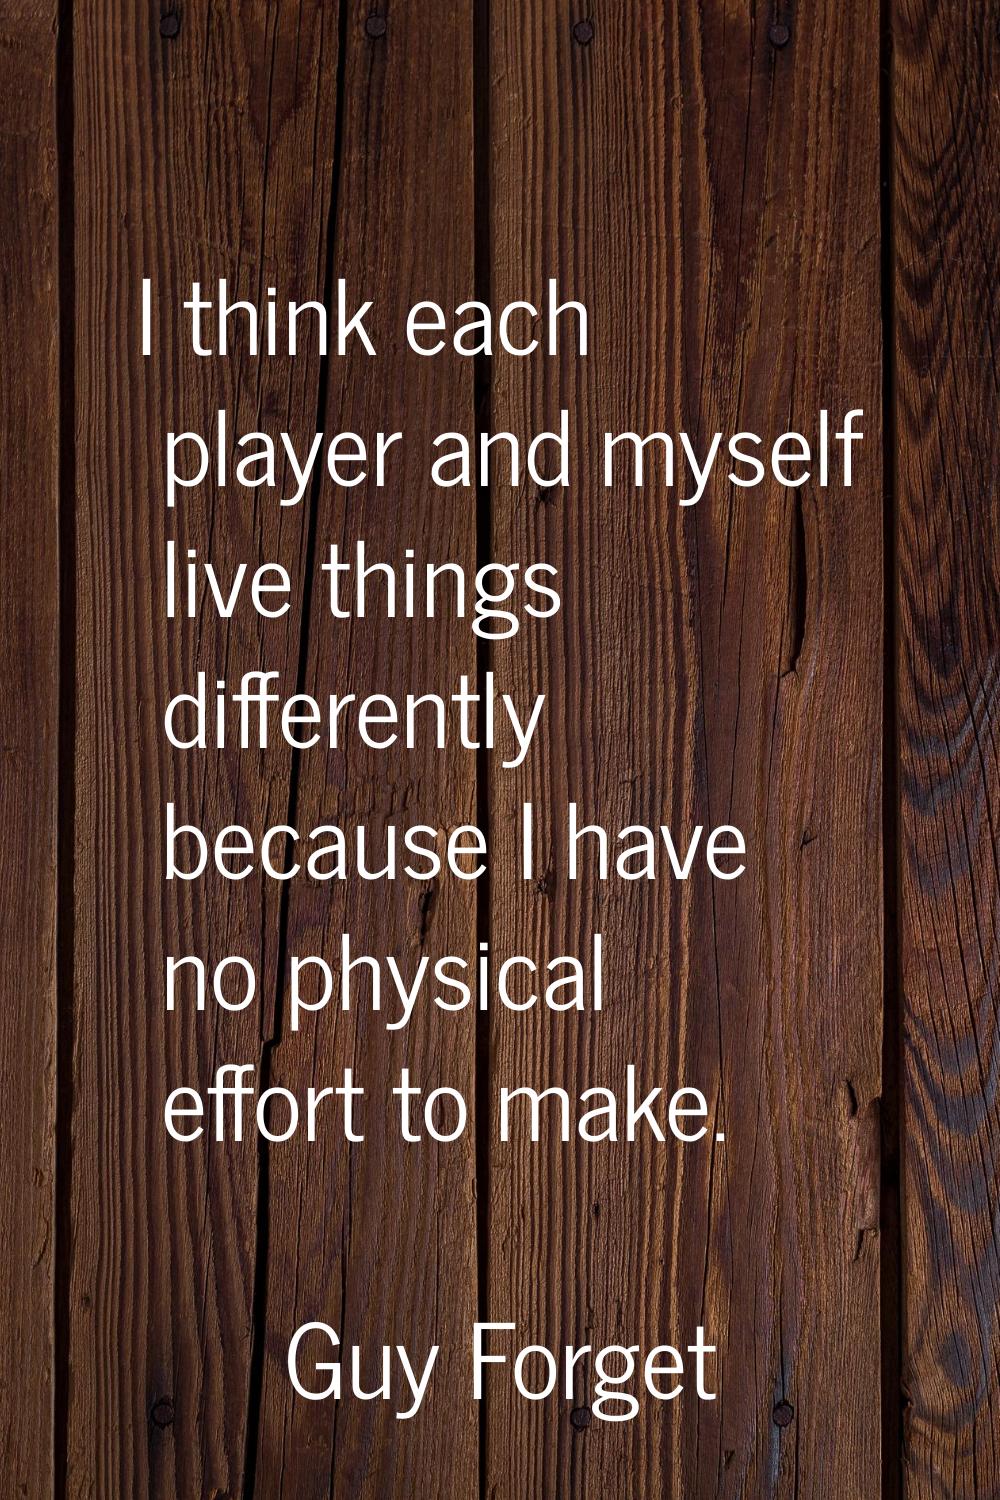 I think each player and myself live things differently because I have no physical effort to make.